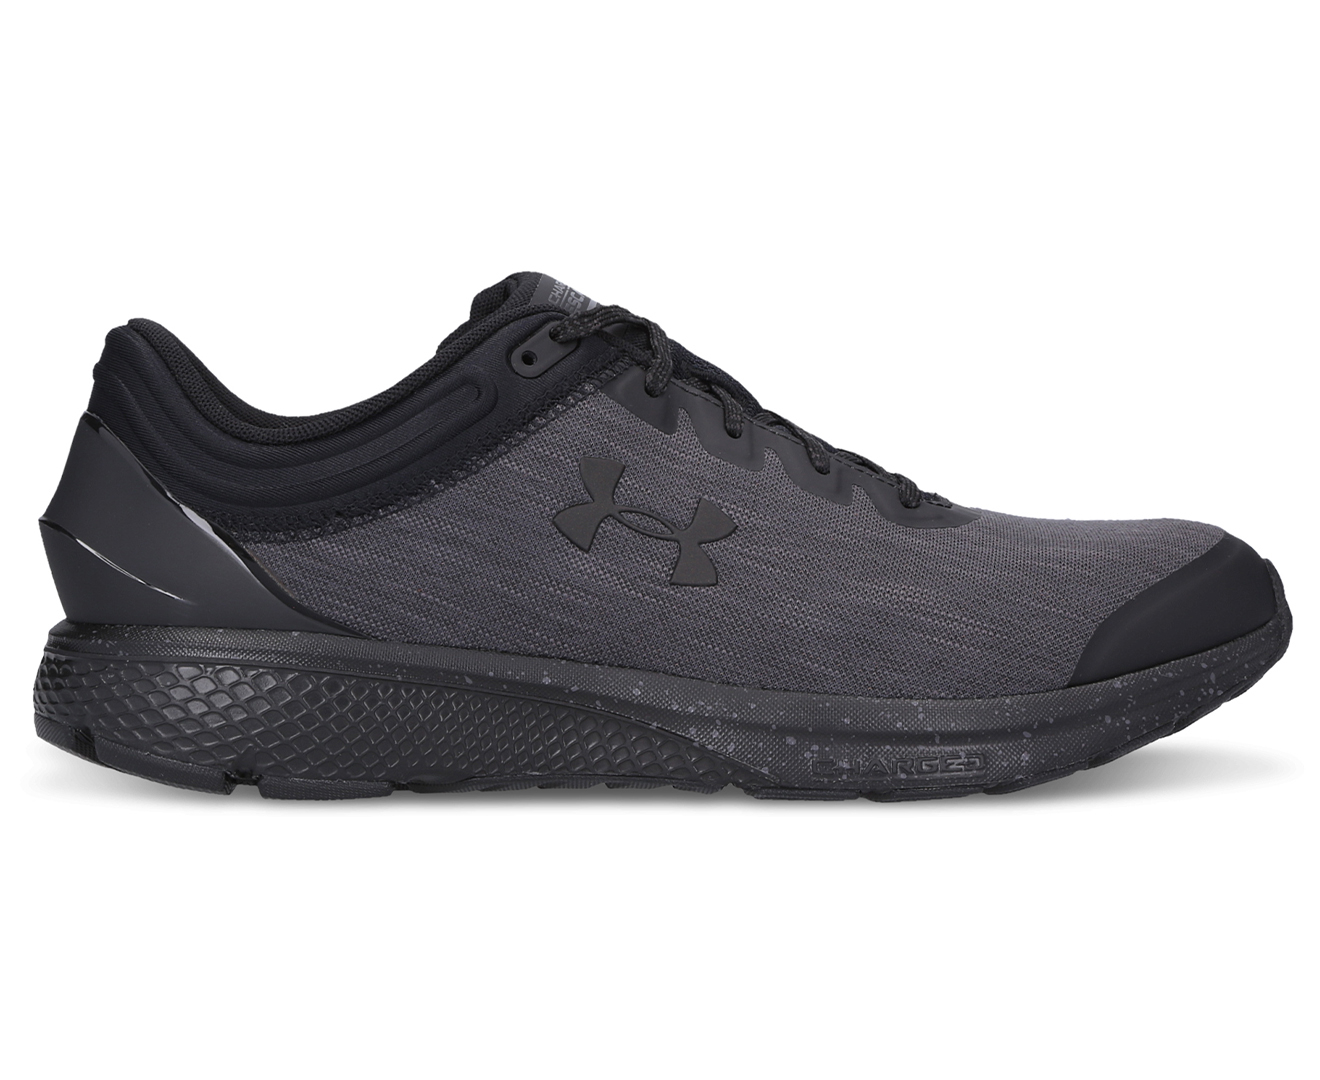 Under Armour Men's Charged Escape 3 Evo Training Shoes - Black/Charcoal ...